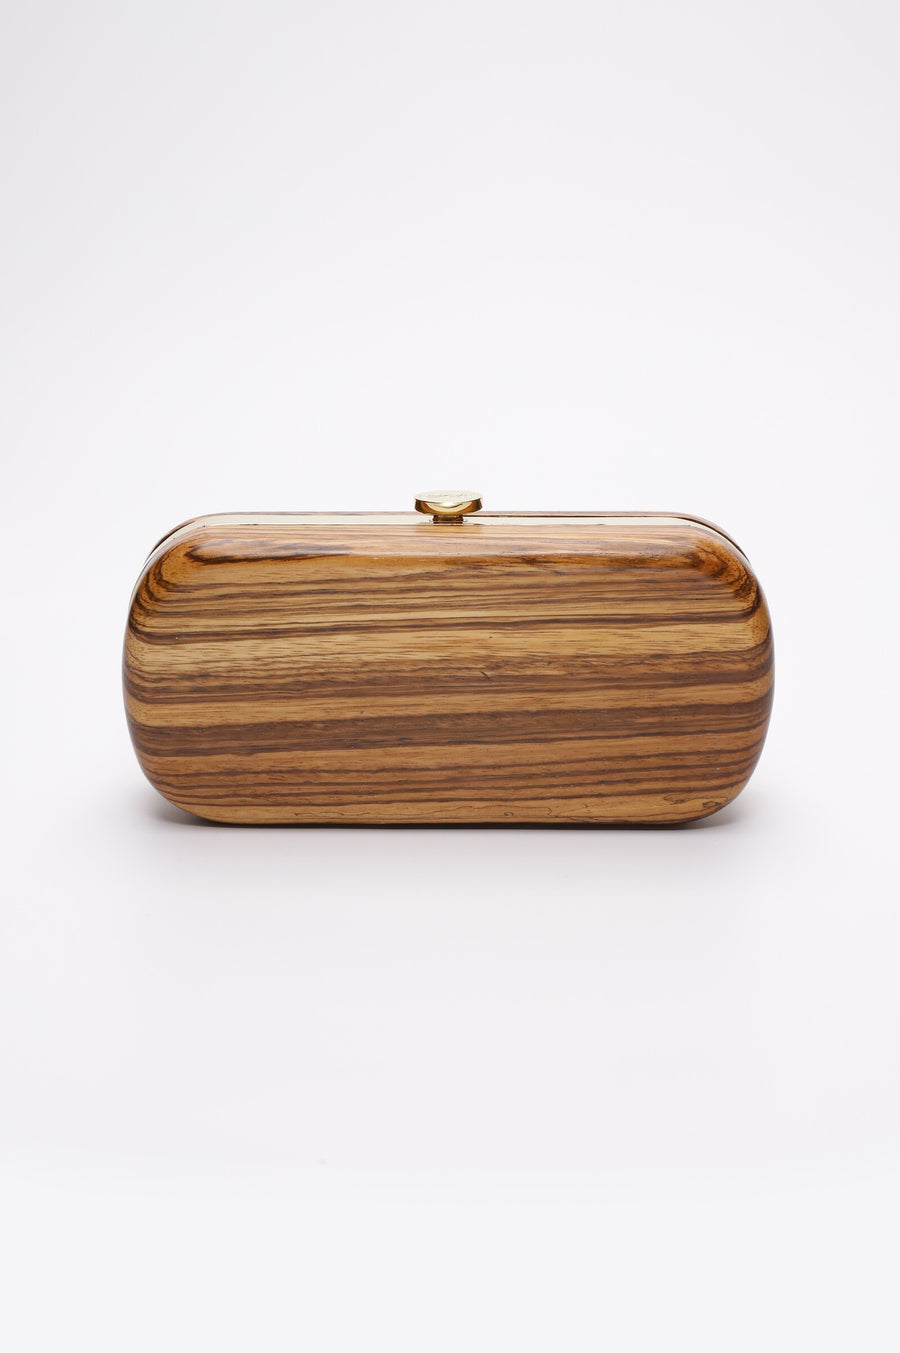 The Bella Rosa Collection Bella Clutch African Zebra Wood Petite, made from sustainably sourced wood with grain pattern and clasp closure.